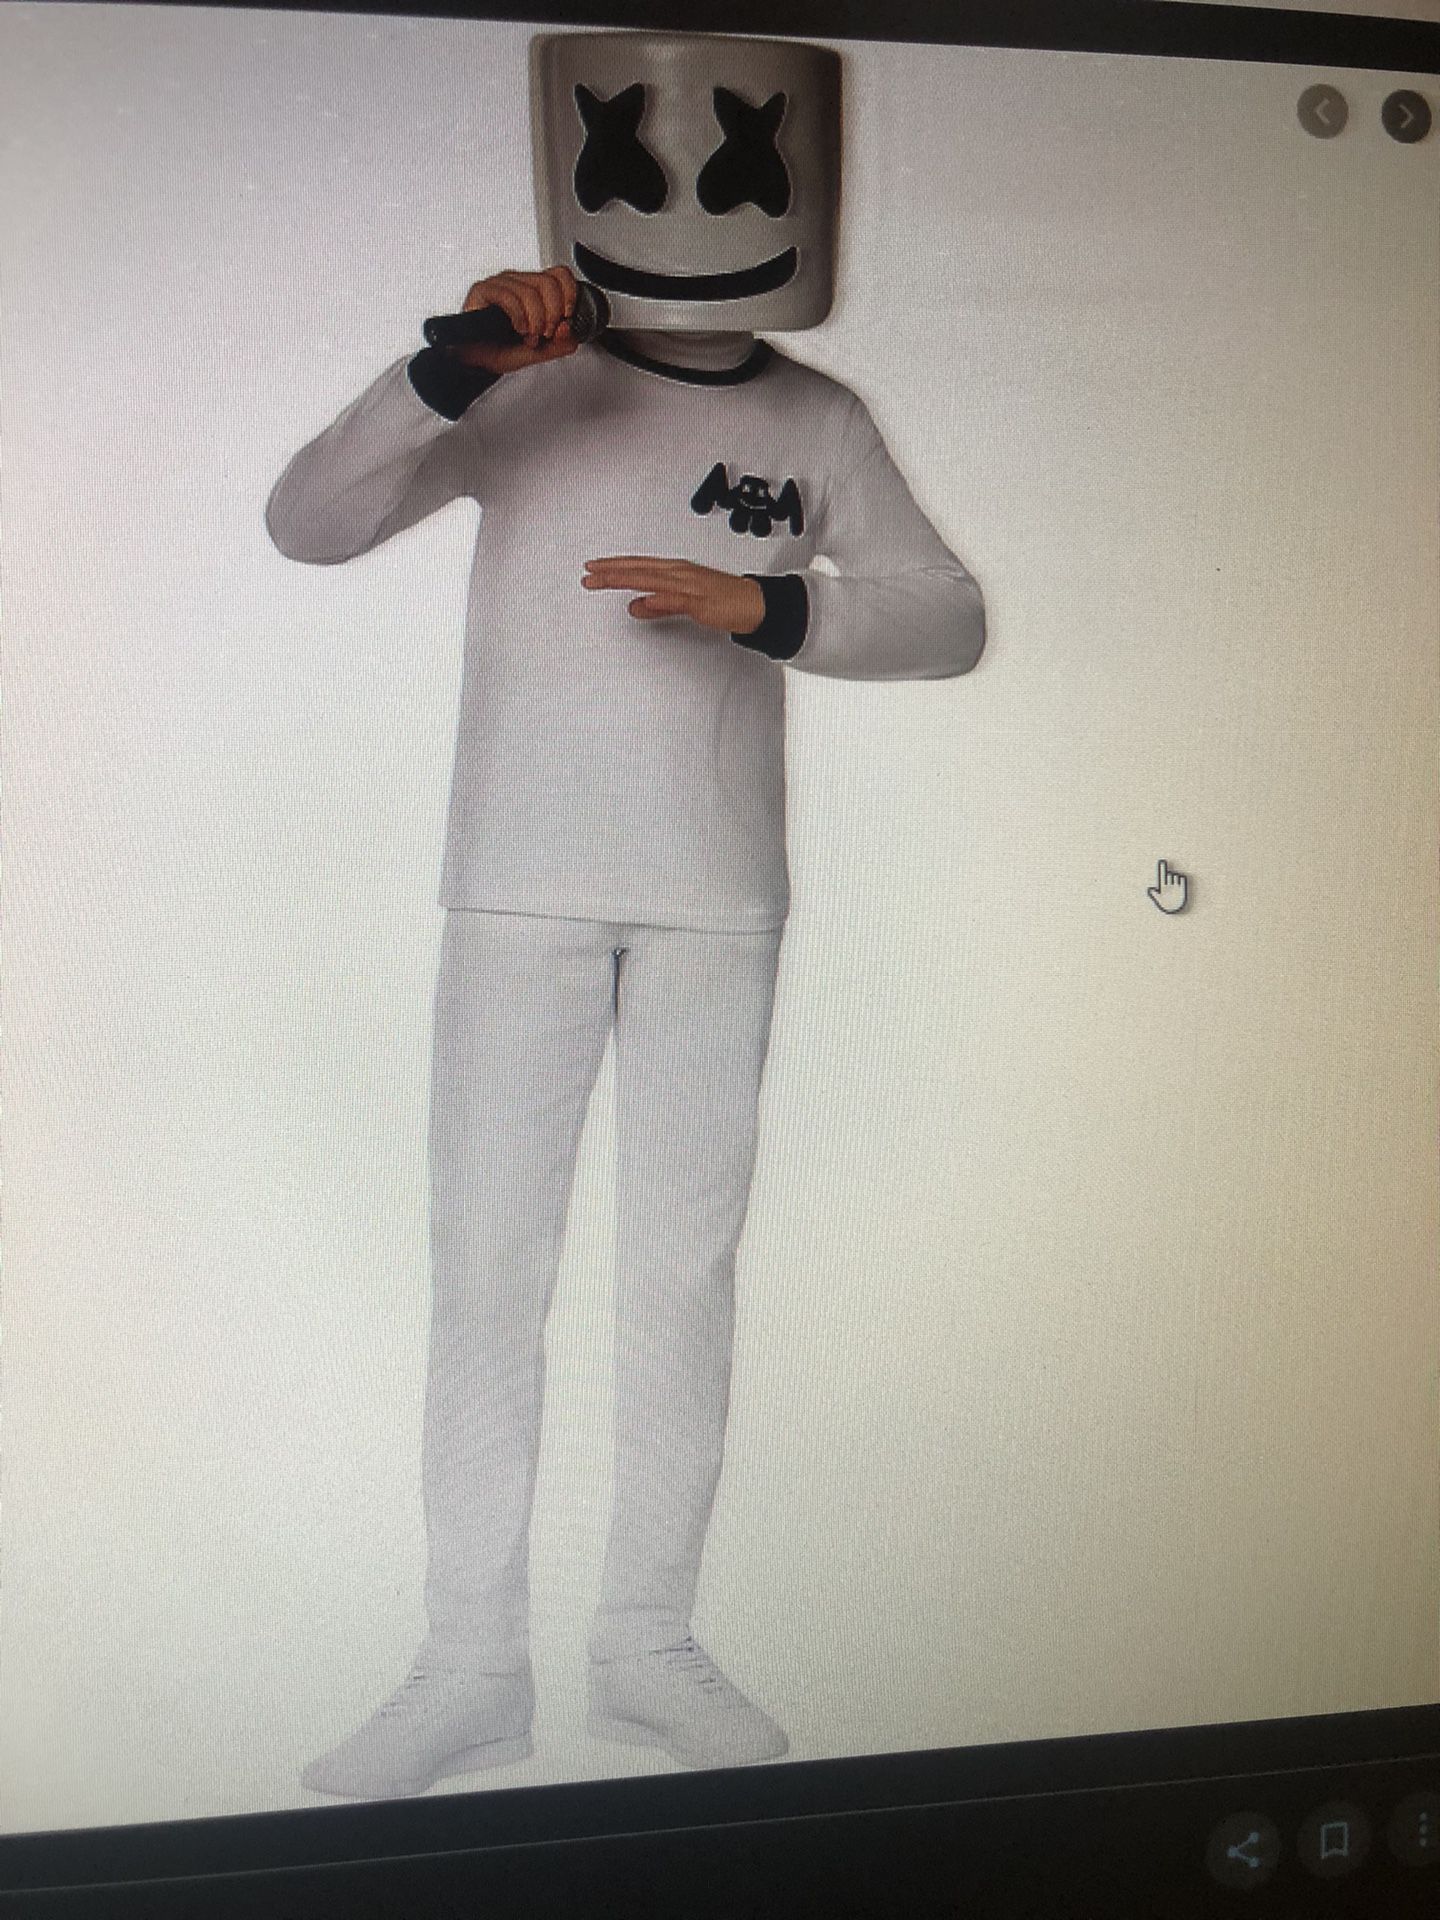 Dj Marshmello costume from party city